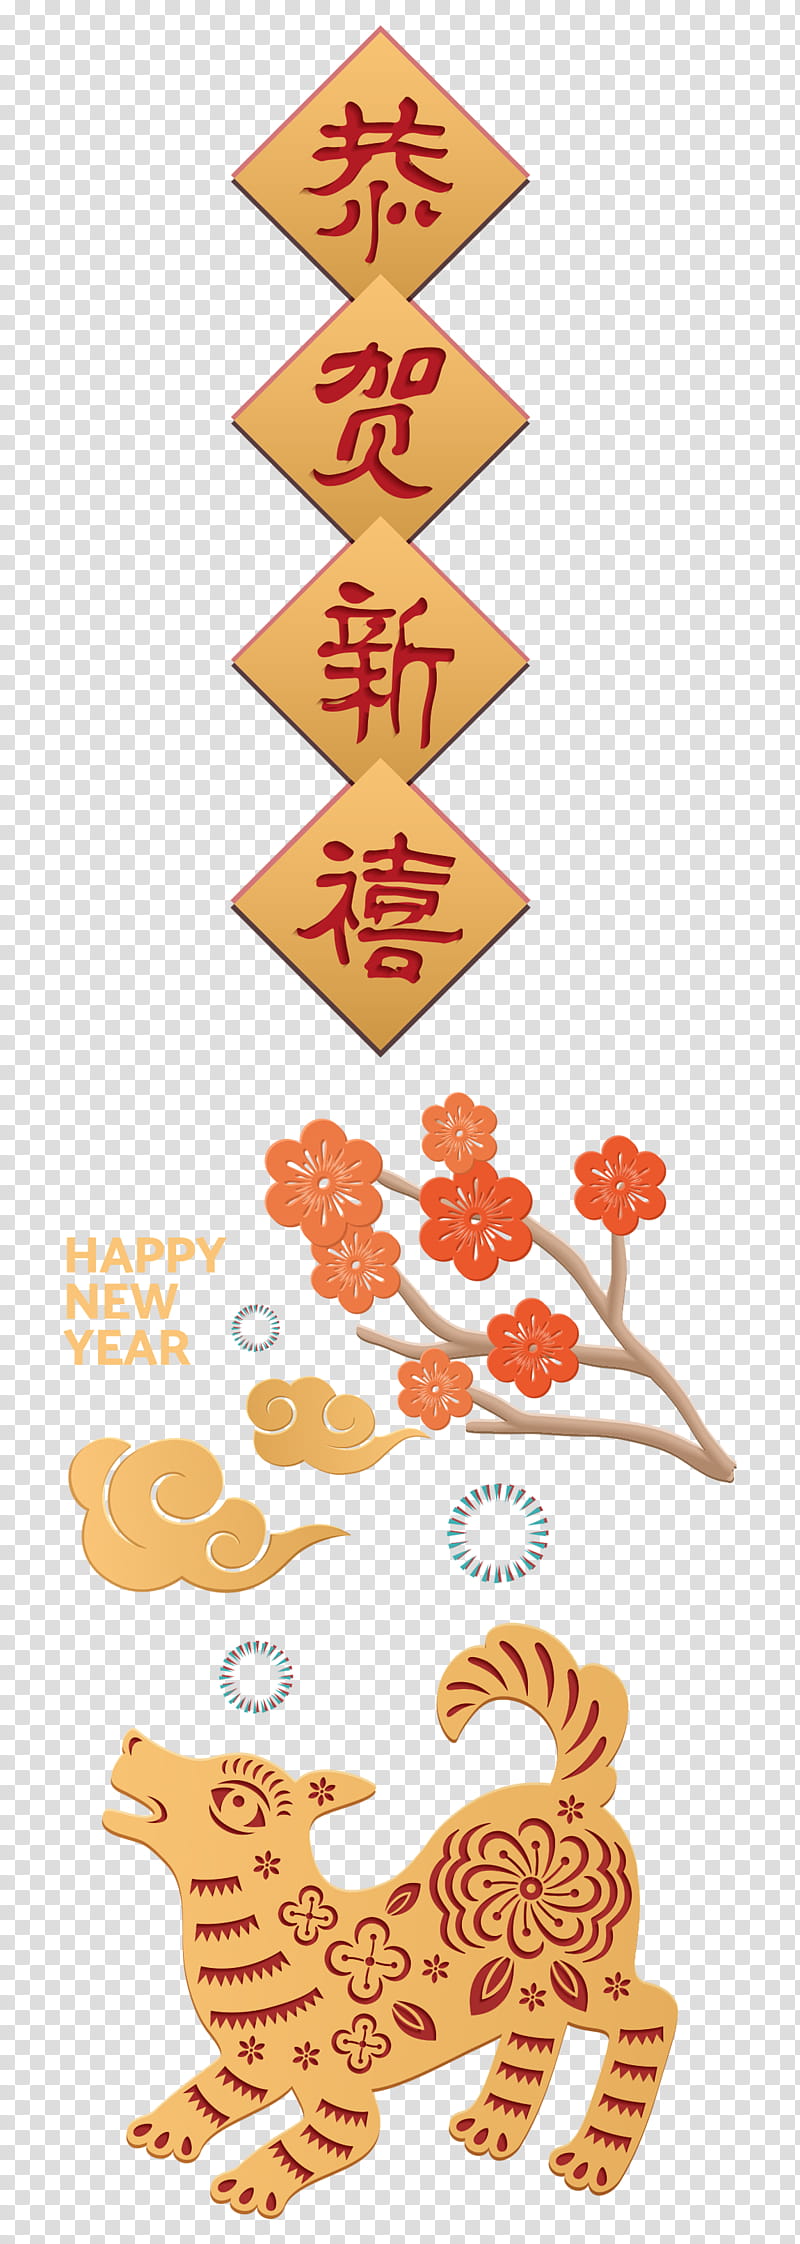 Chinese New Year Paper Cutting, Lunar New Year, Bainian, New Years Day, Poster, Festival, Lantern Festival, Chinese Paper Cutting transparent background PNG clipart